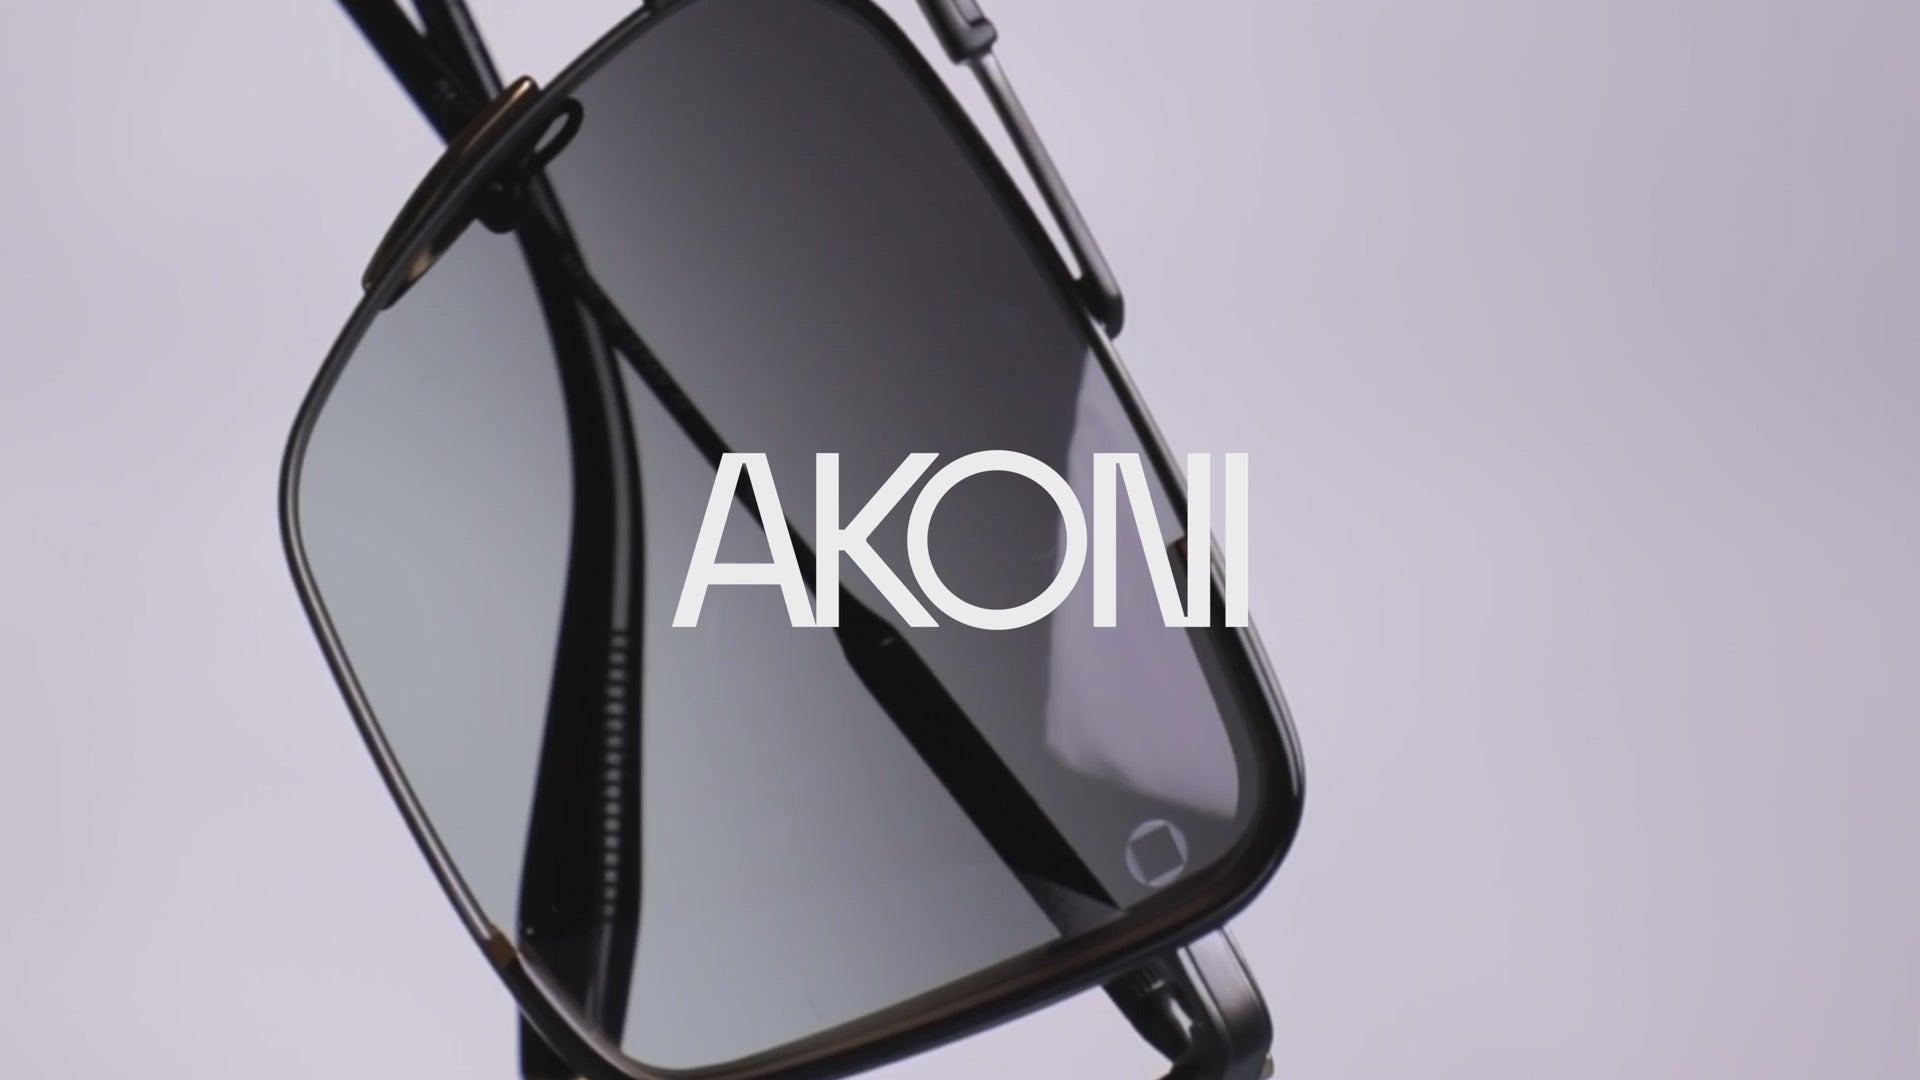 Load video: Akoni Eyewear is Now Available at Oculus Eye Gallery